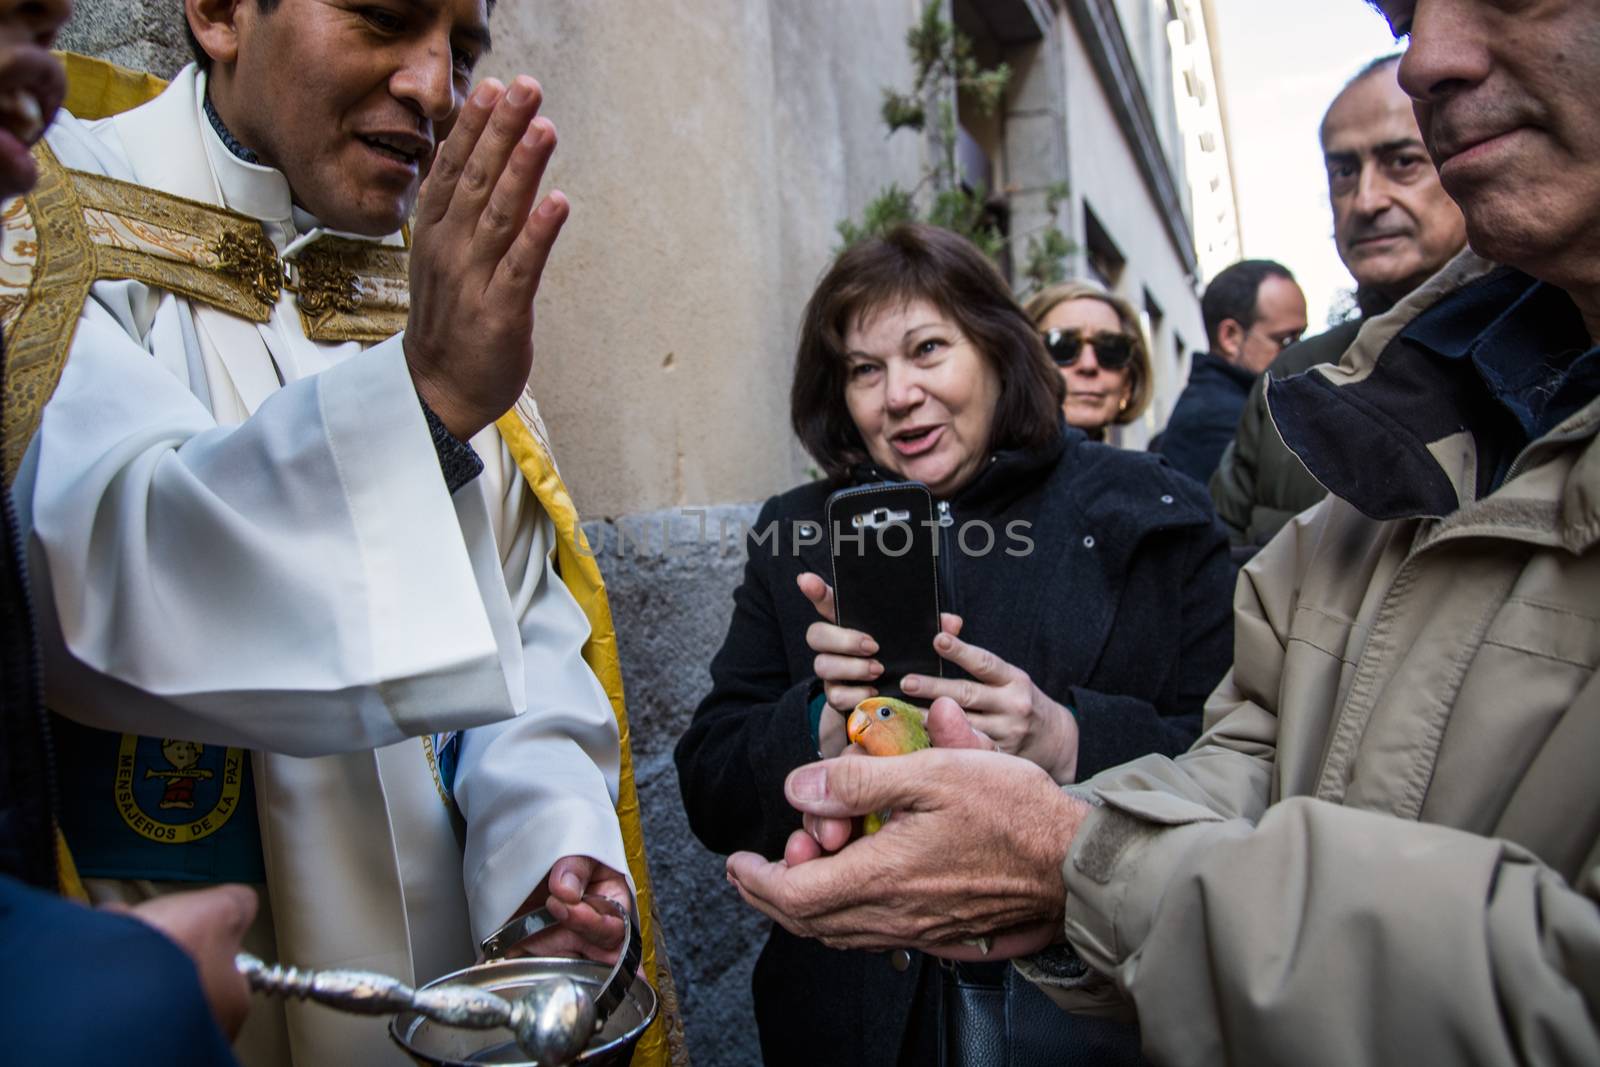 SPAIN, Madrid: A man holds his pet bird while it's being blessed by a priest outside the church of San Antón in Calle de Hortaleza in Madrid on Saint Anthony's day, the patron saint of animals, on January 17, 2016.